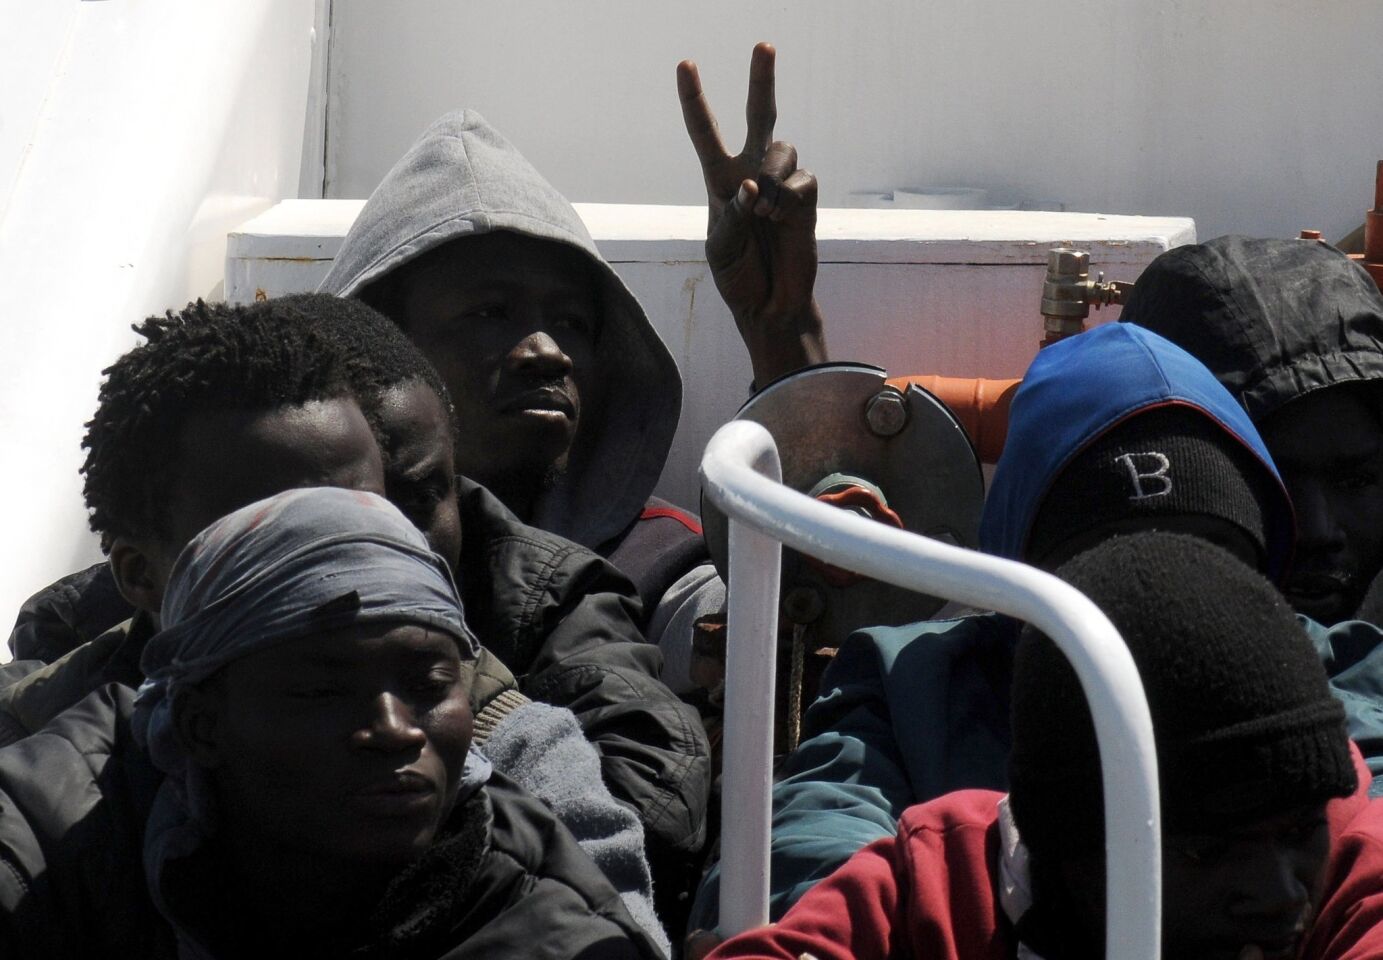 Migrants arrive at Palermo's harbor, Italy, after being rescued at sea. The U.N. refugee agency says the shipwreck in the Mediterranean this week, in which 400 migrants are presumed to have died, is among the deadliest single incidents in the last decade.